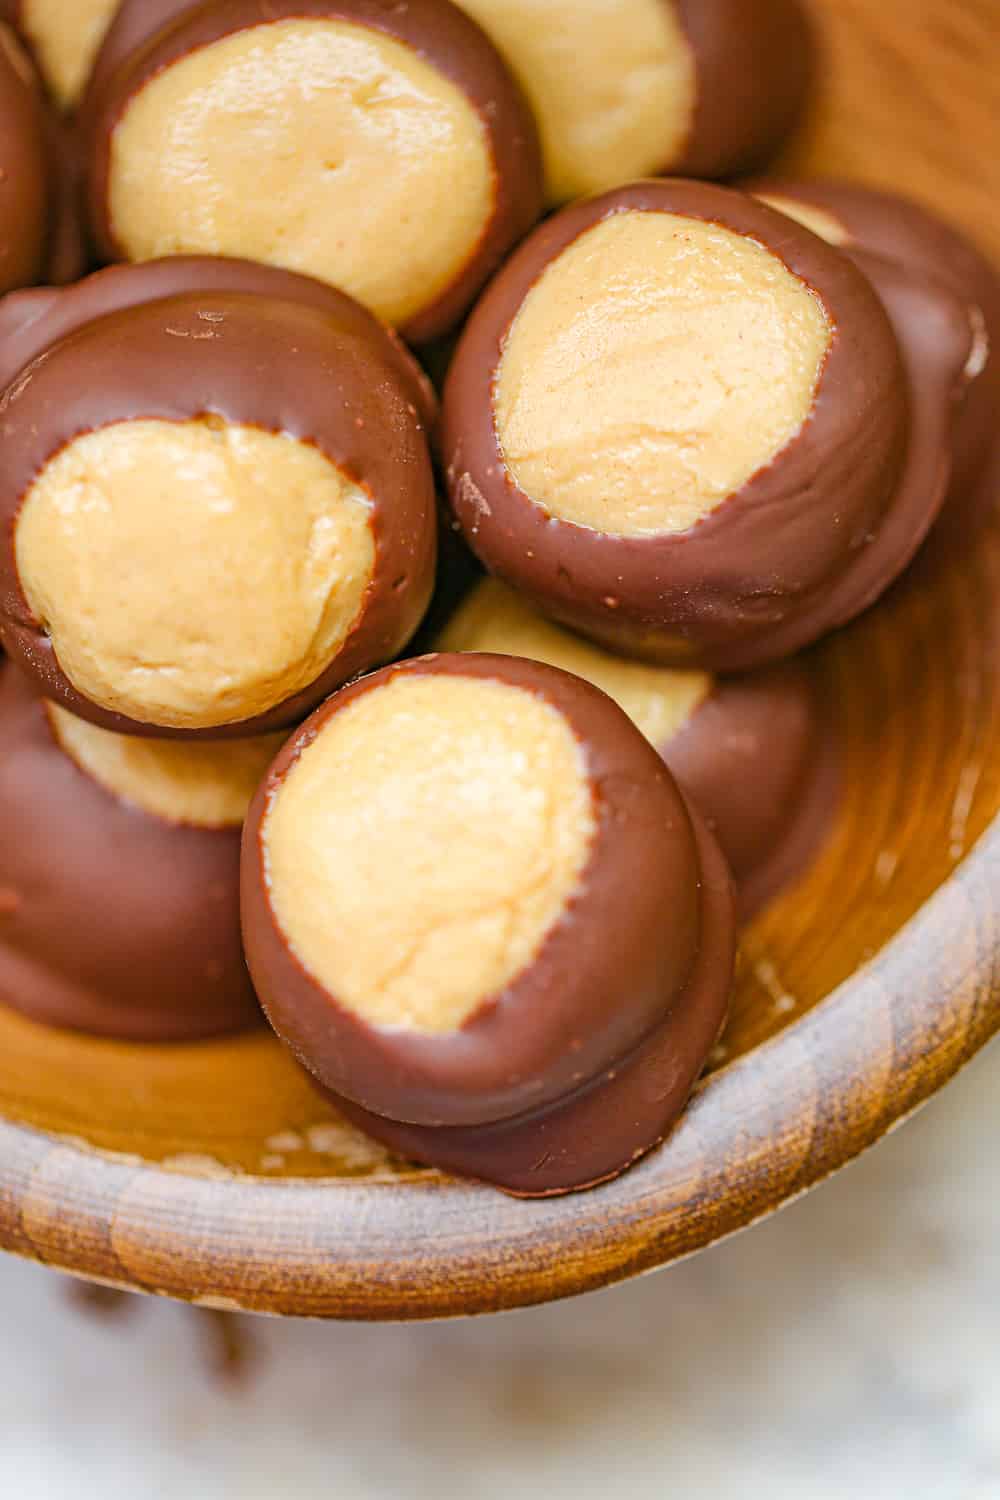 How to Make Buckeyes Candies